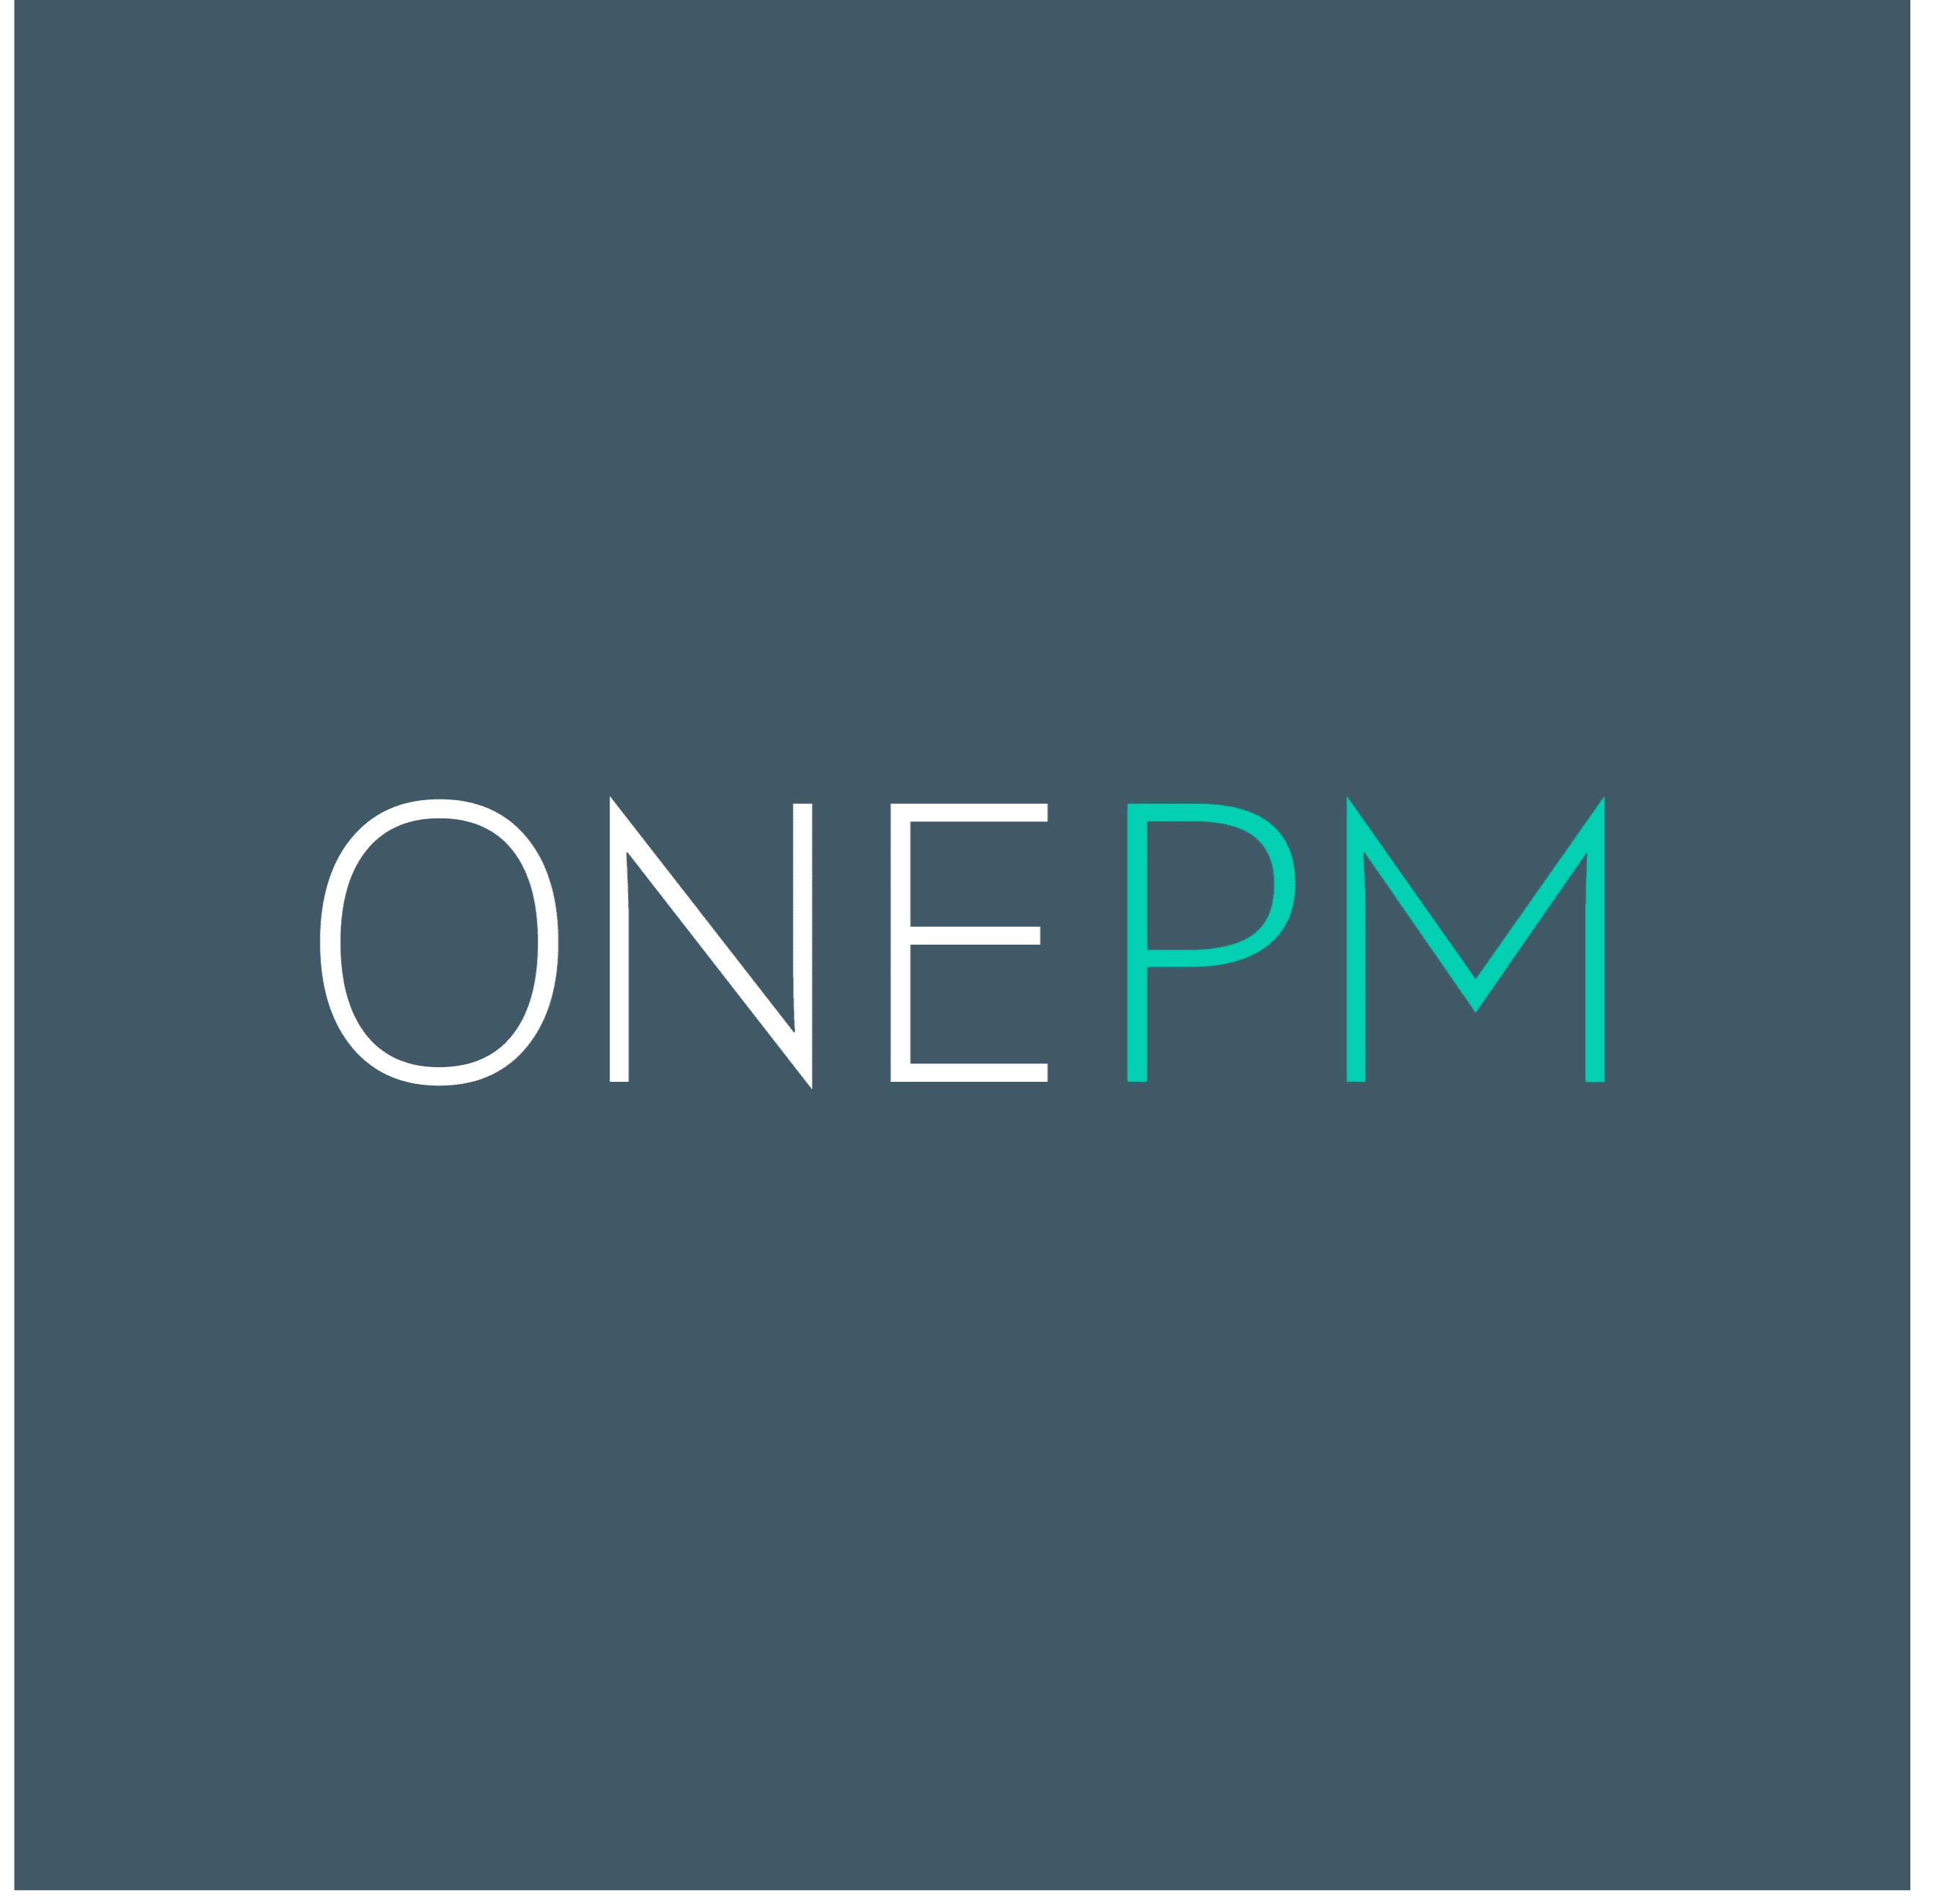 ONE PM AG